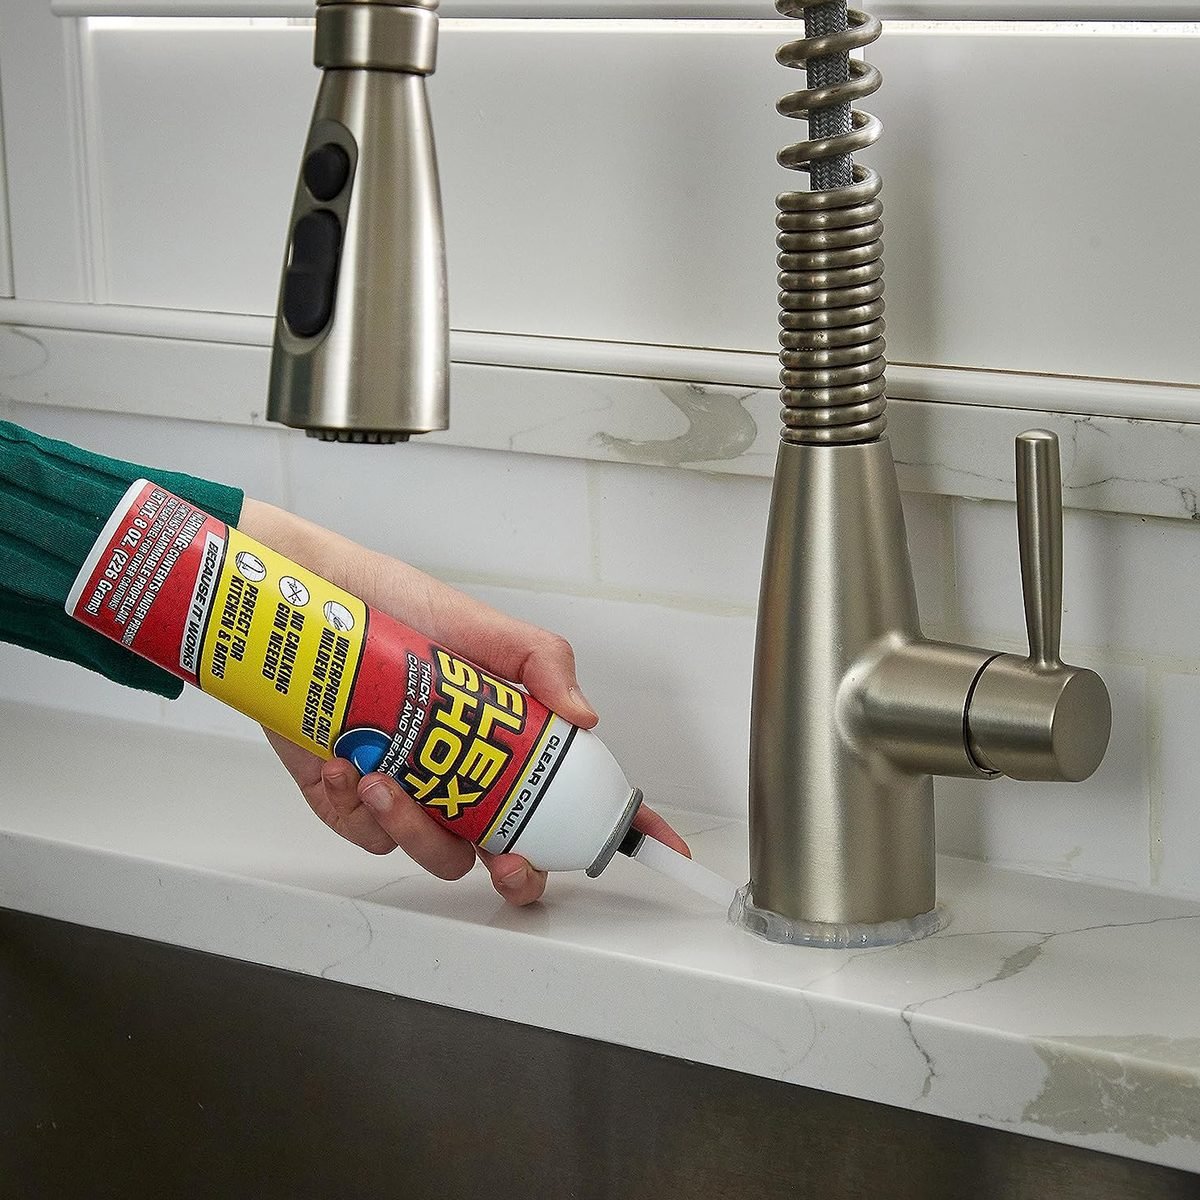 24 DIY Tools You Should Have at the Ready for Quick-Fix Home Repairs